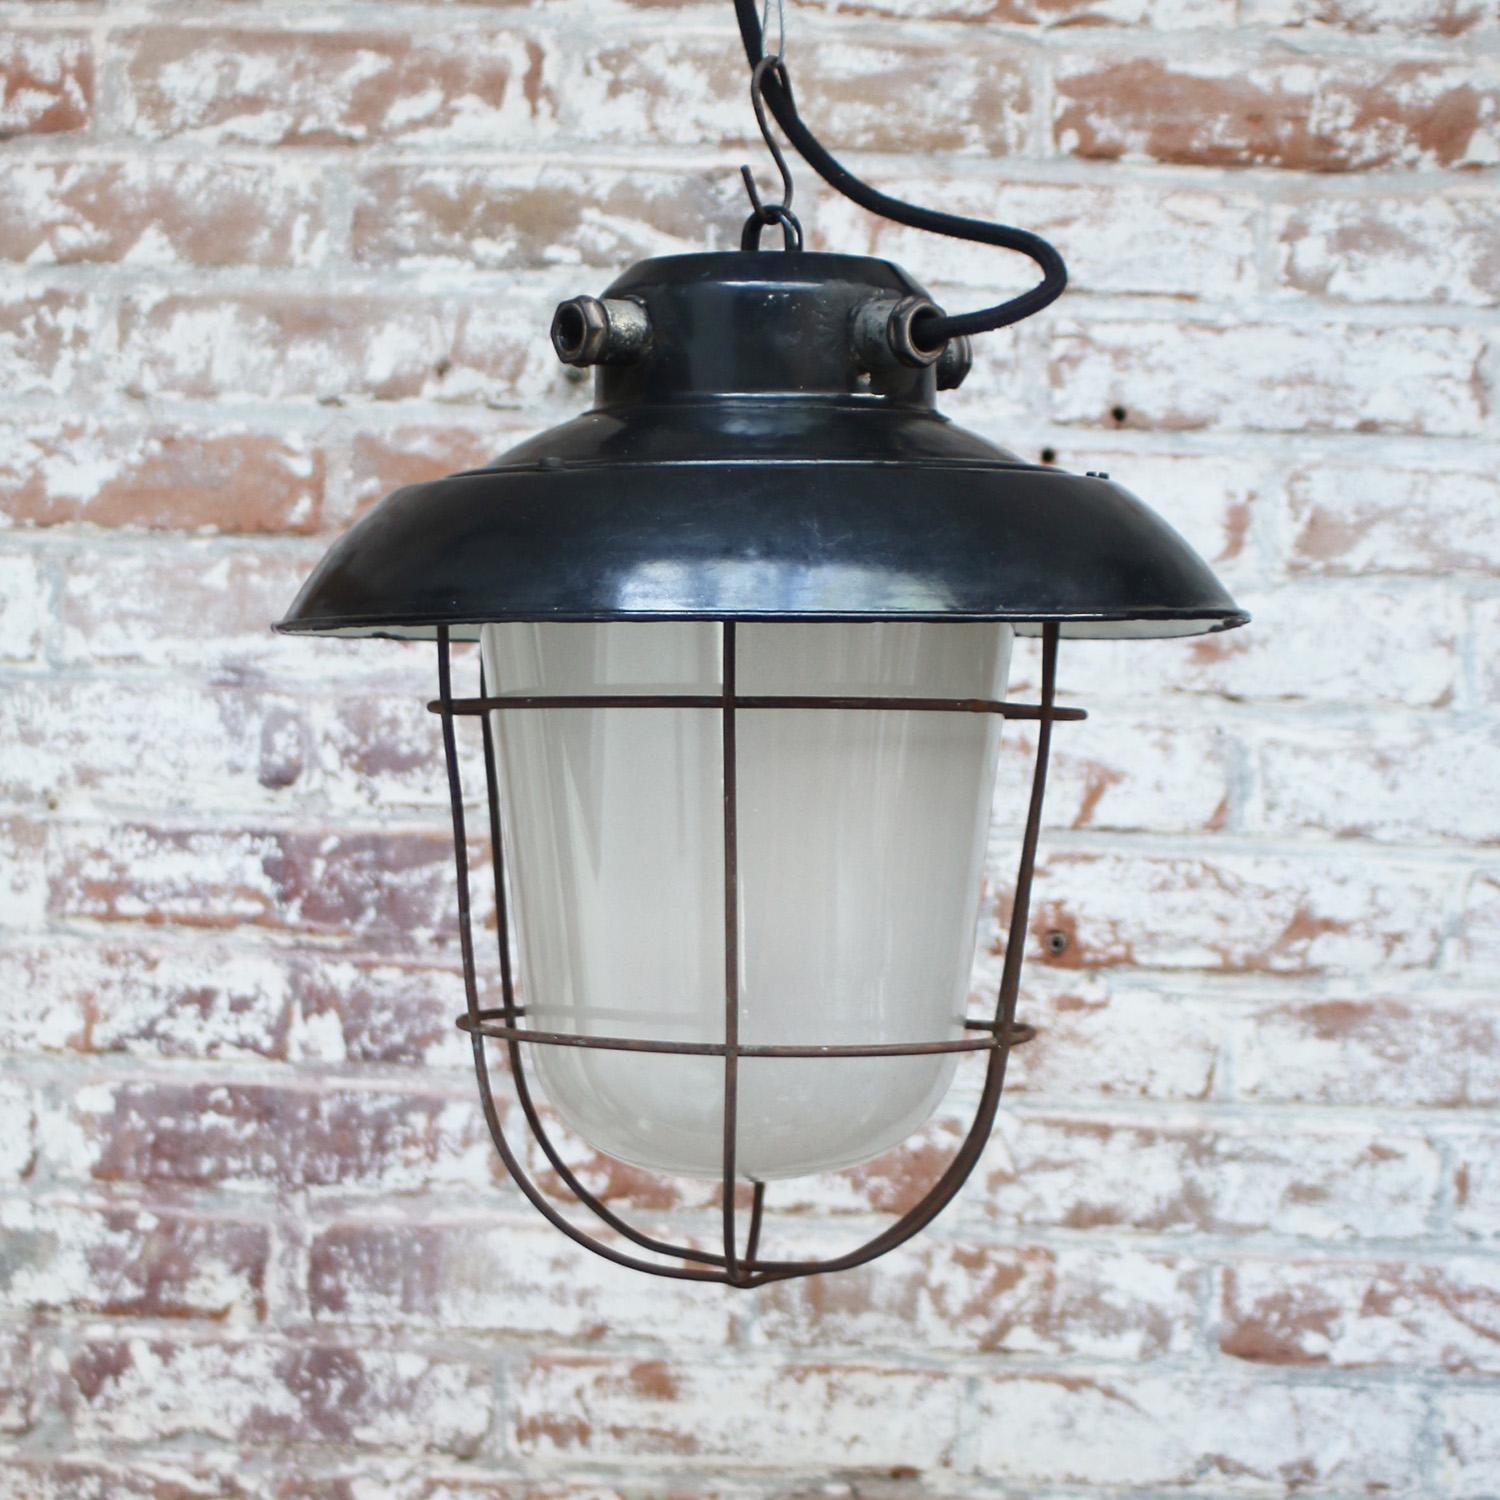 Black Enamel Vintage Industrial Frosted Glass Pendant Light In Good Condition For Sale In Amsterdam, NL